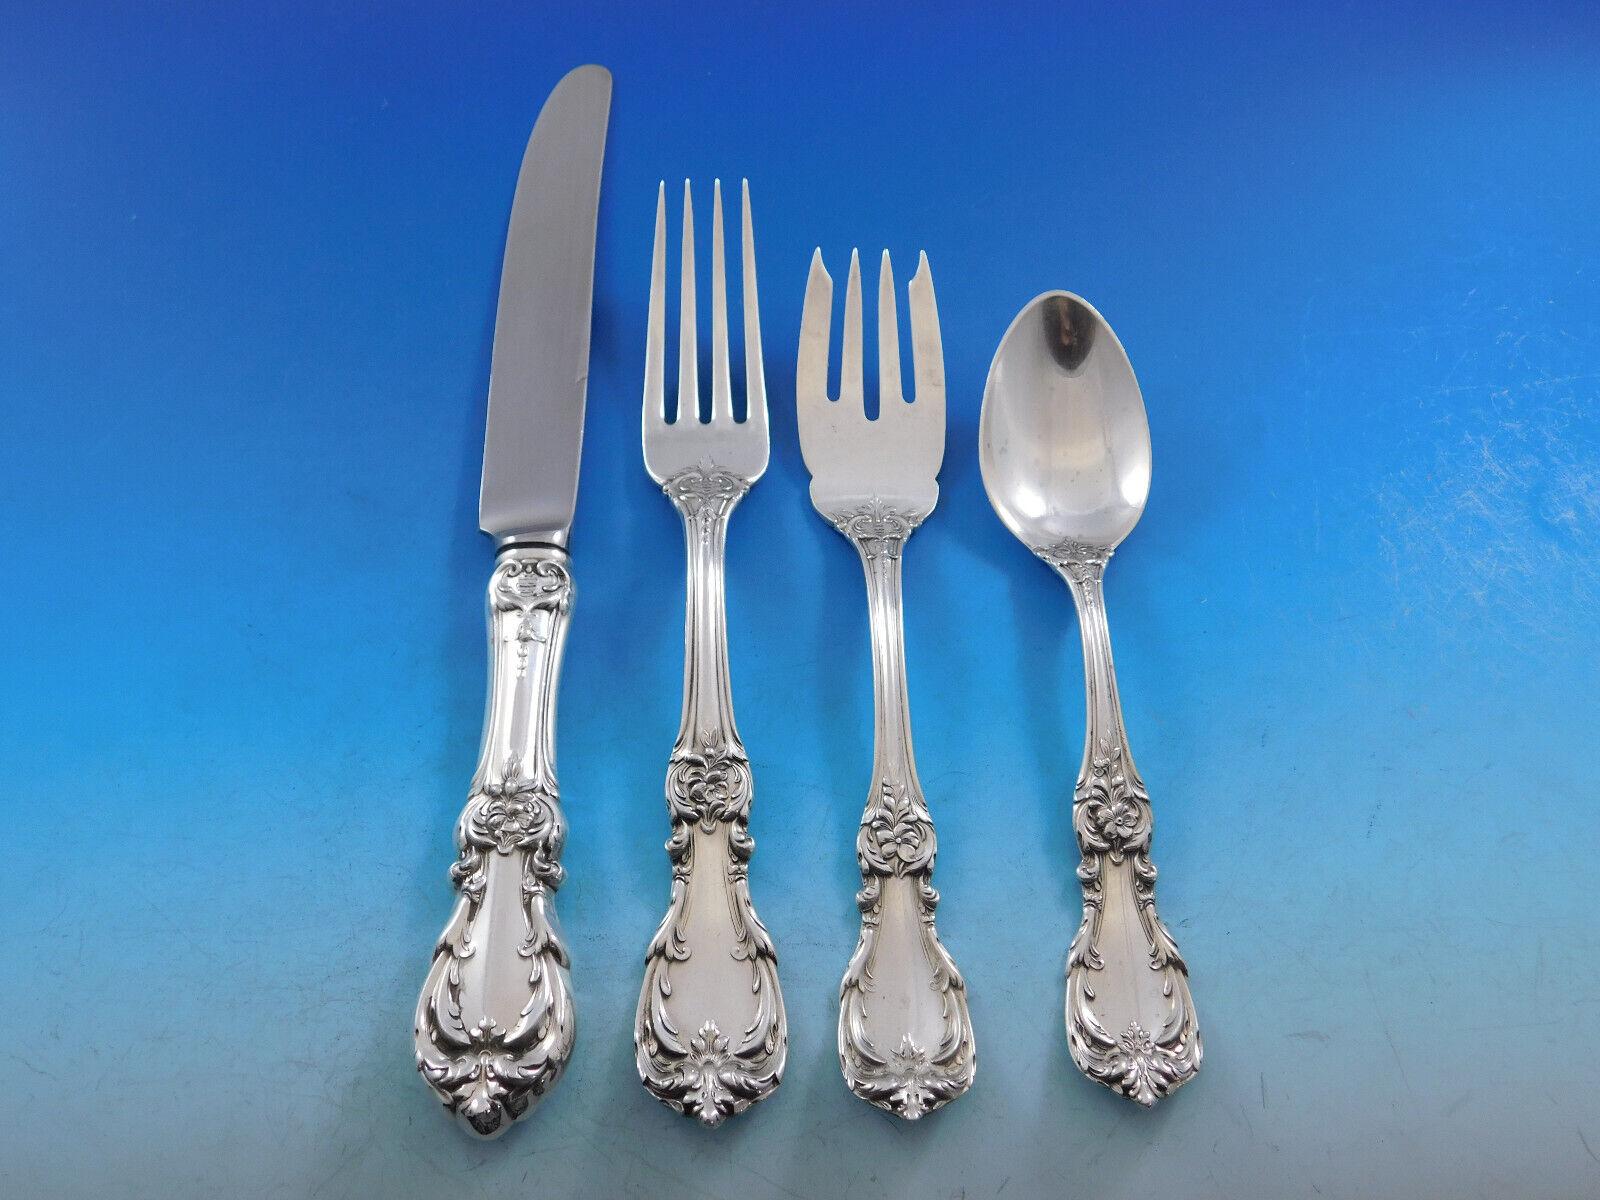 Burgundy by Reed & Barton Sterling Silver Flatware Set 12 Service 129 Pcs Dinner In Excellent Condition For Sale In Big Bend, WI